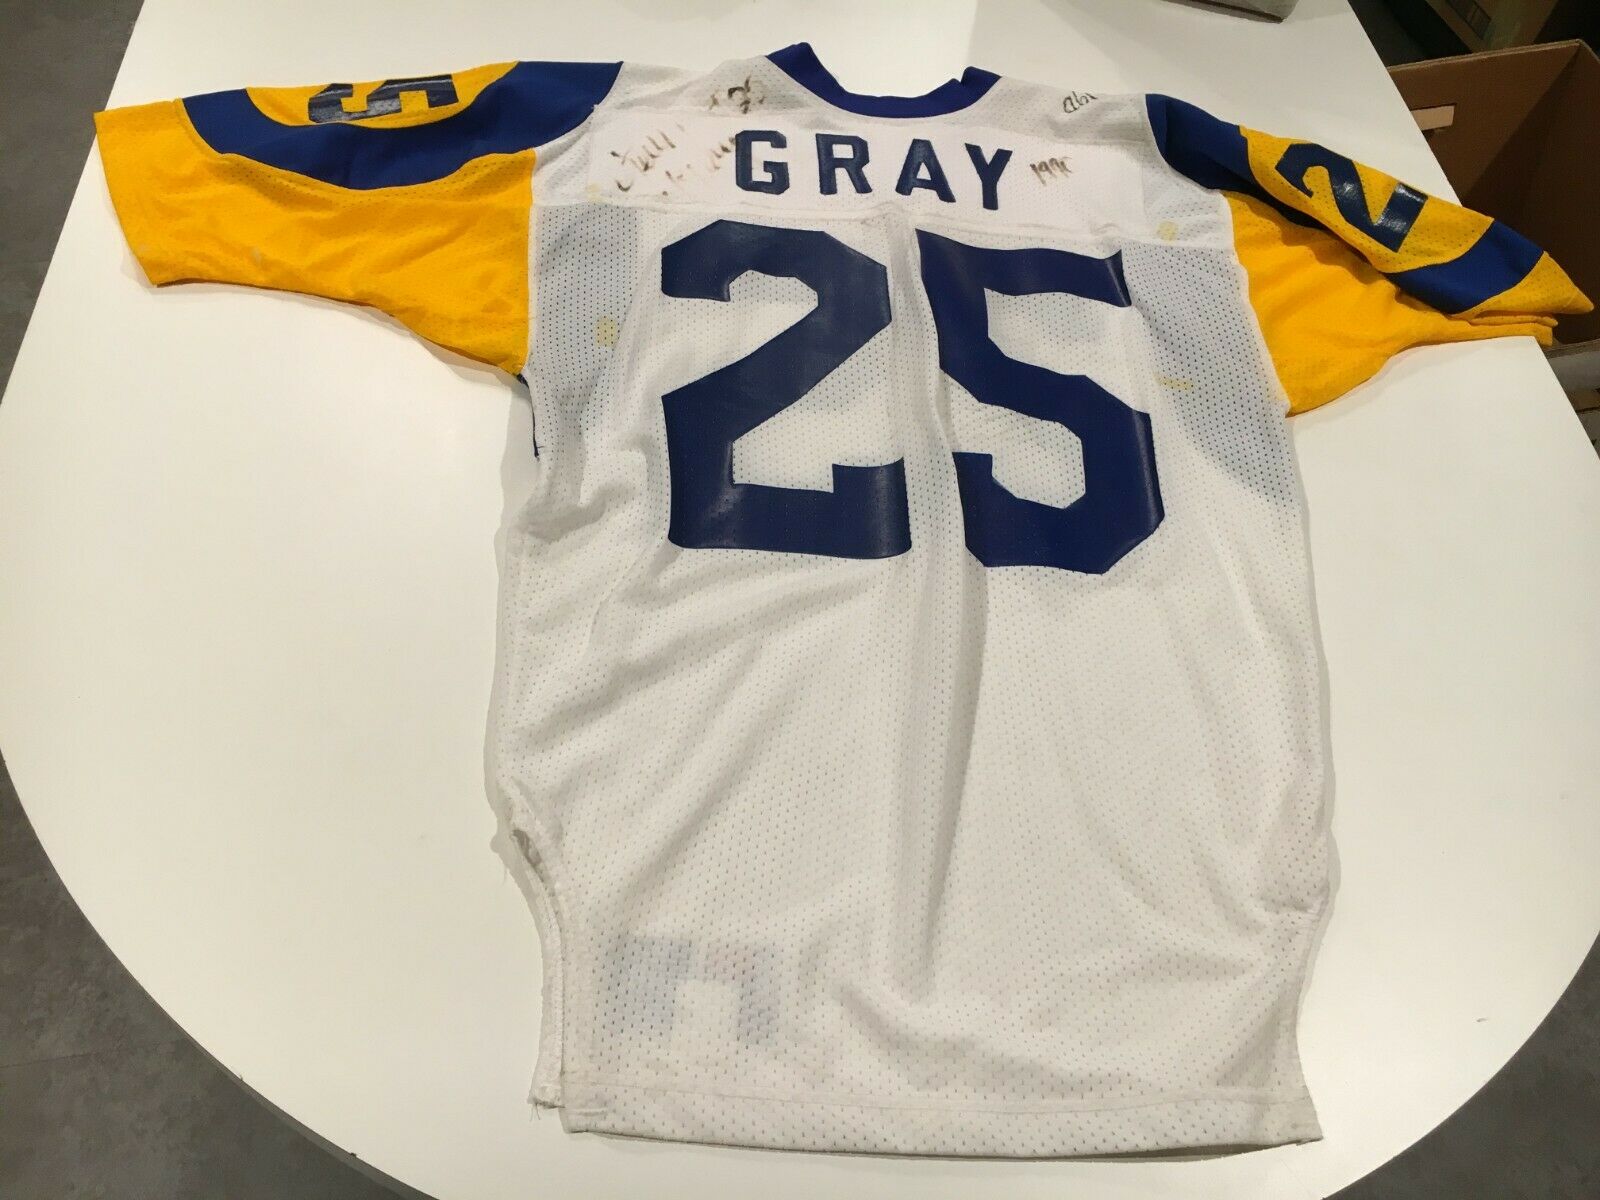 Original 1990 Jerry Gray Los Angeles Rams Nfl Football Signed, Game Worn Jersey